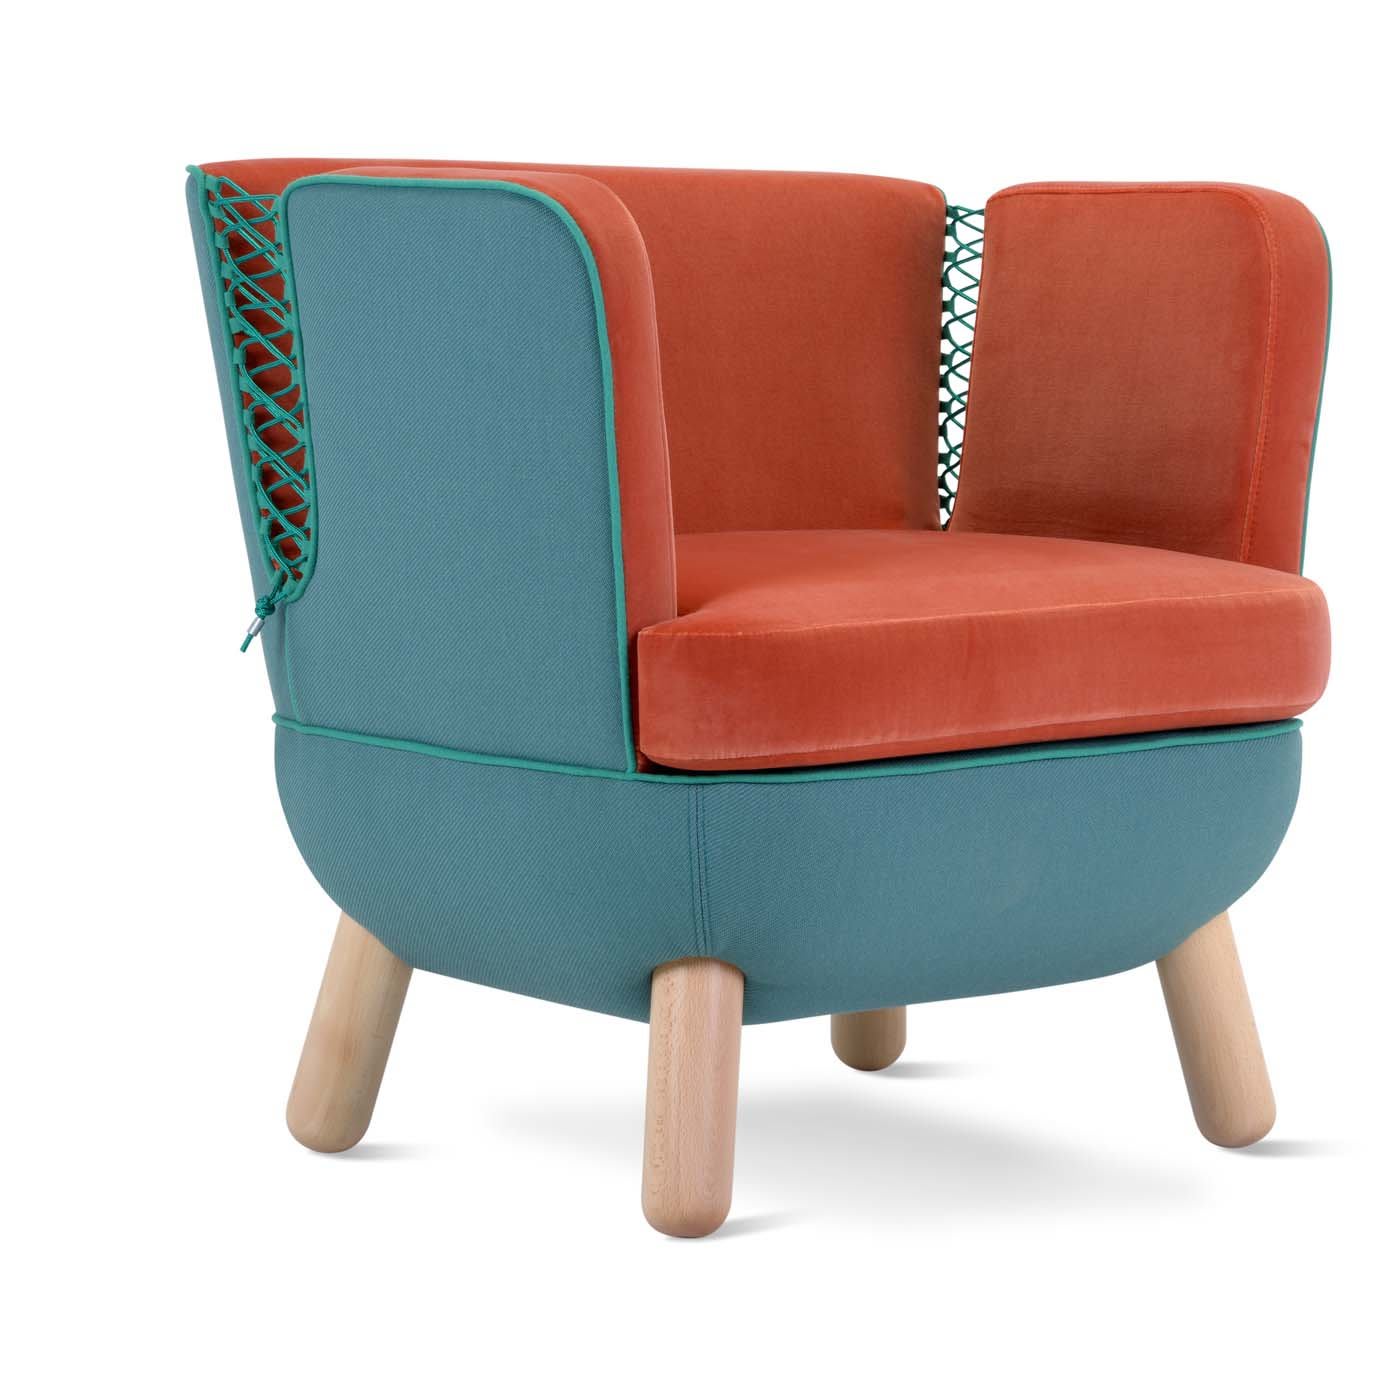 Sly Low Armchair with Ropes By Italo Pertichini - Adrenalina